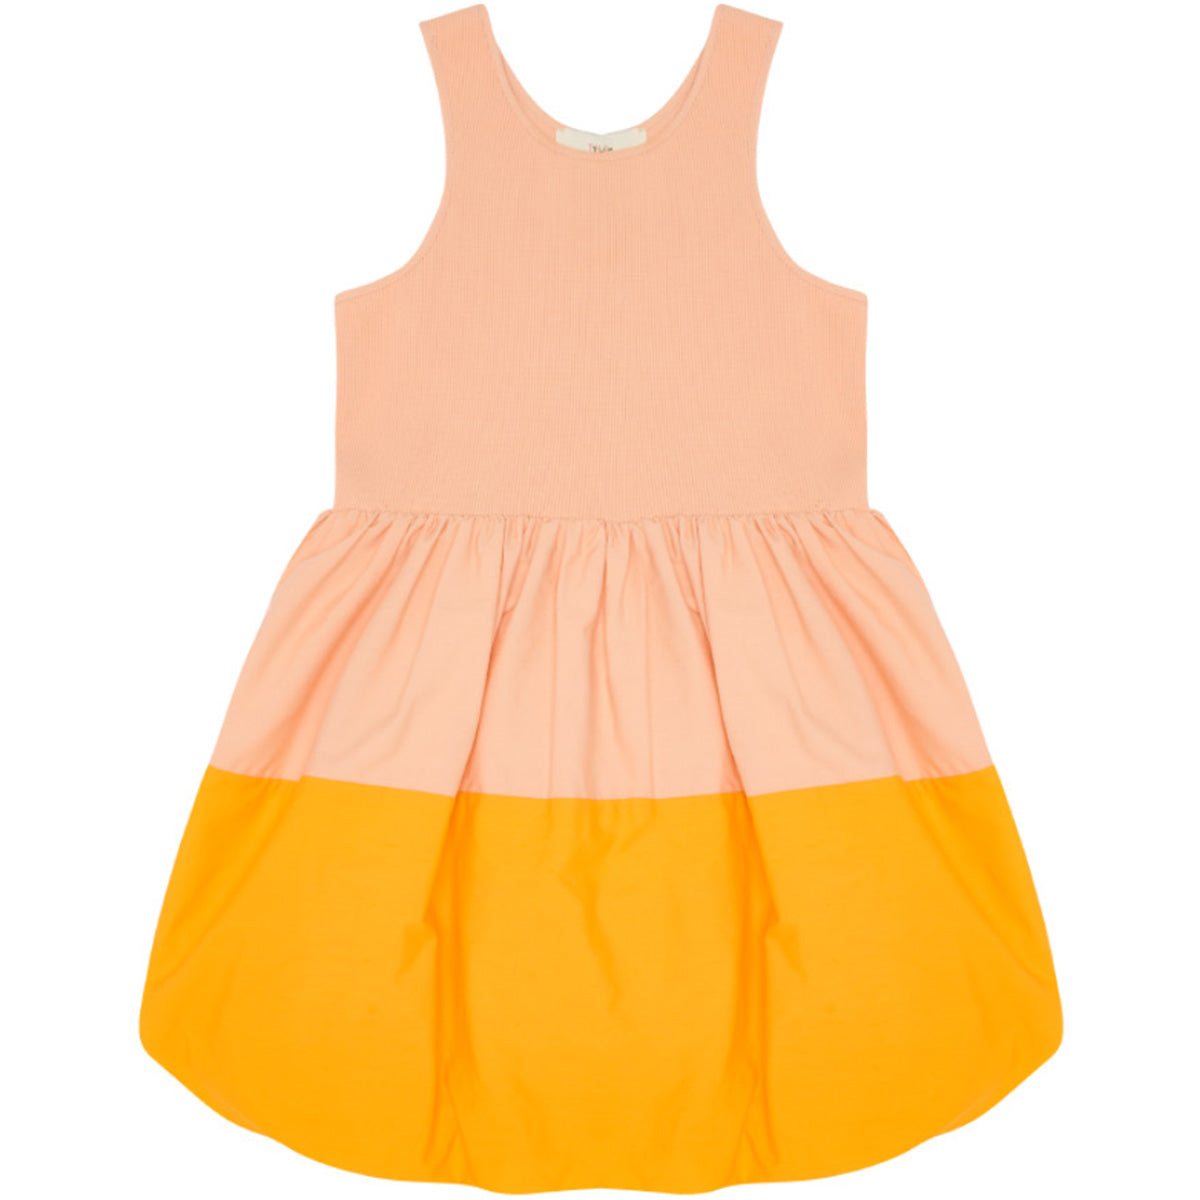 The Balls In The Air Dress from The Middle Daughter. Color-block cotton rib bodice dress with cotton poplin bubble hem skirt